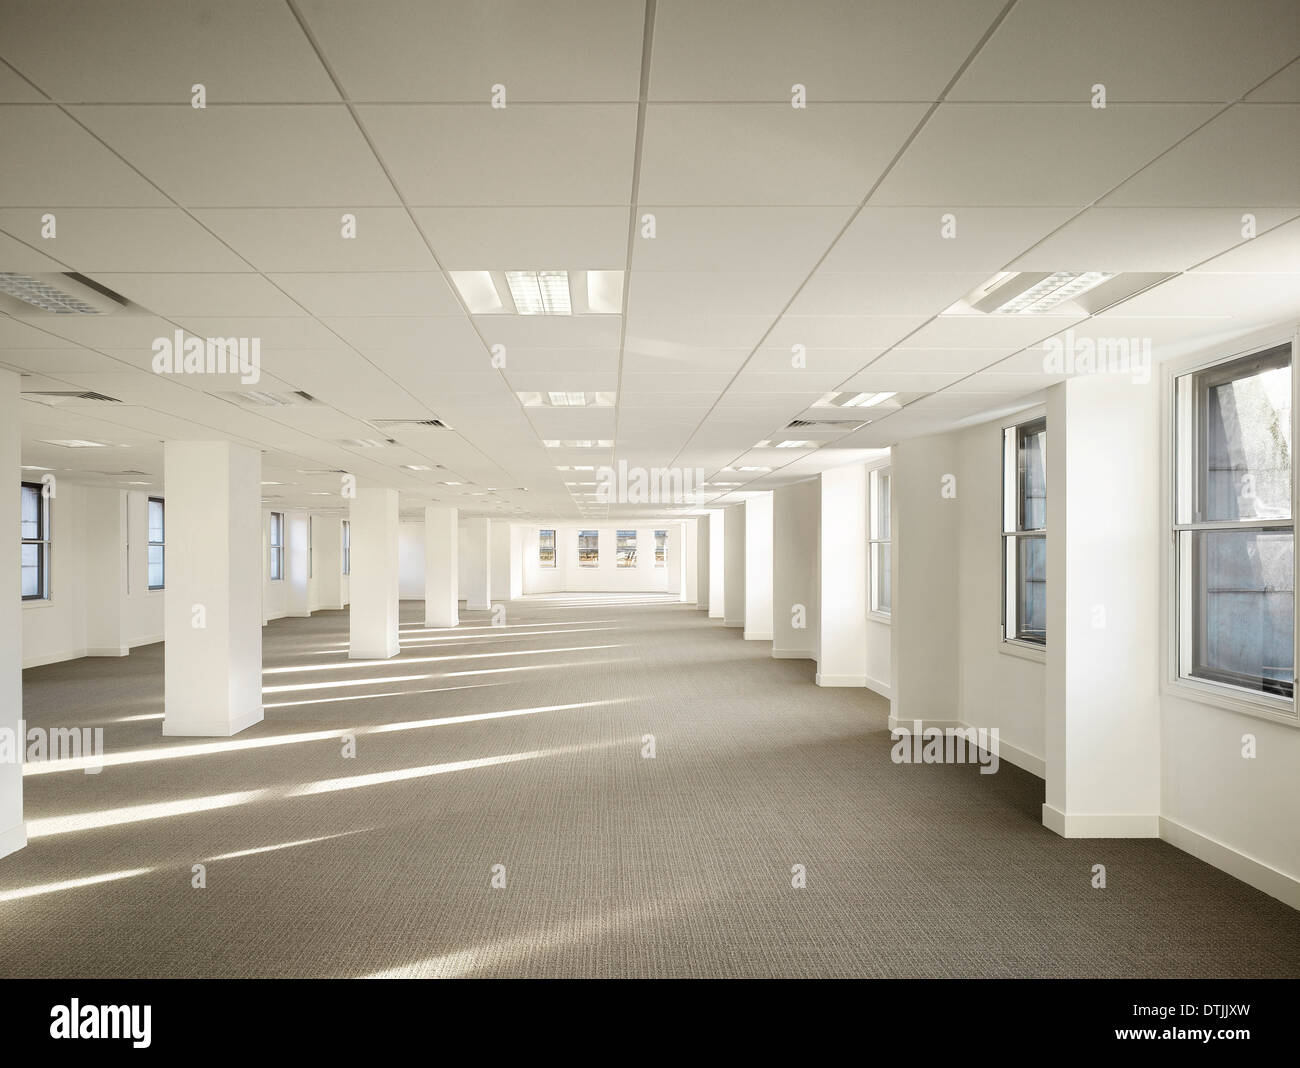 interior of empty office space in commercial building king street DTJJXW